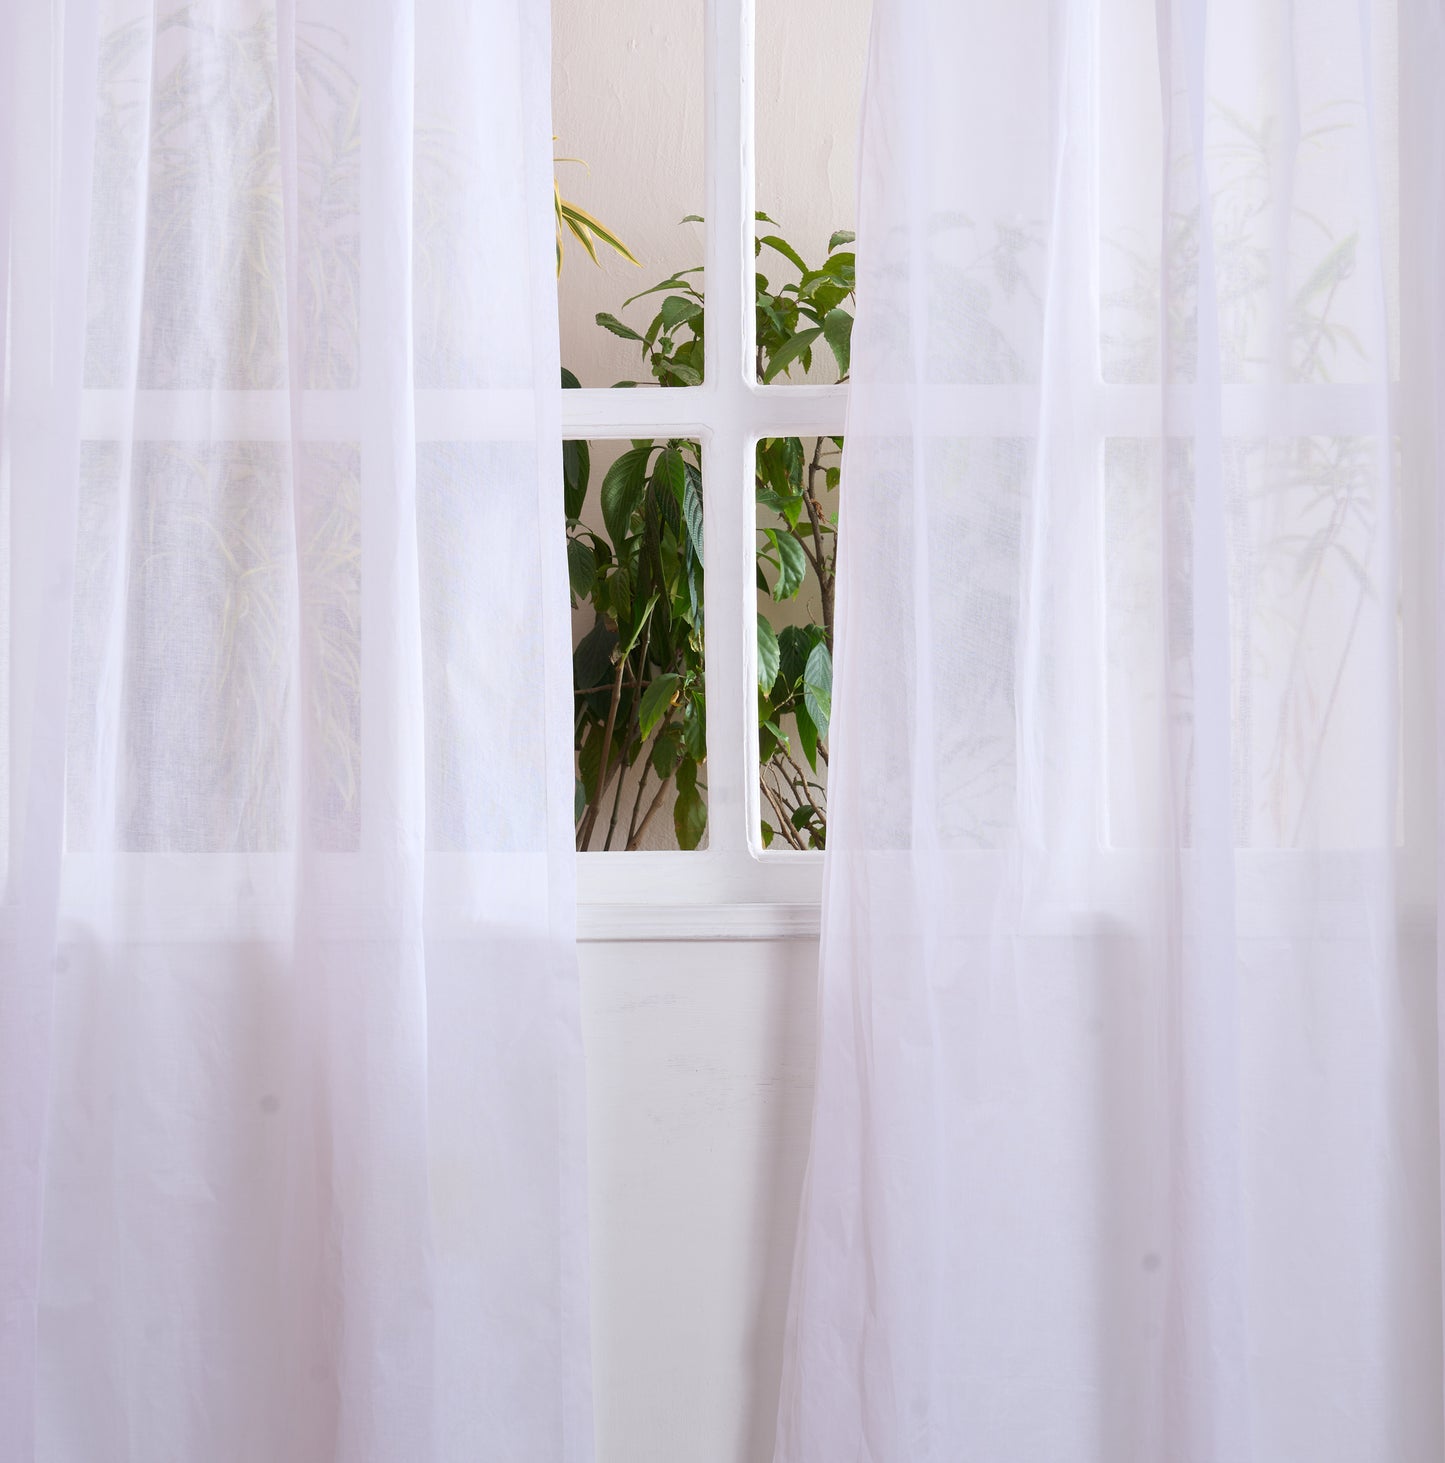 Curtain, white sheer cotton organdy, window panel, home decor, sizes available